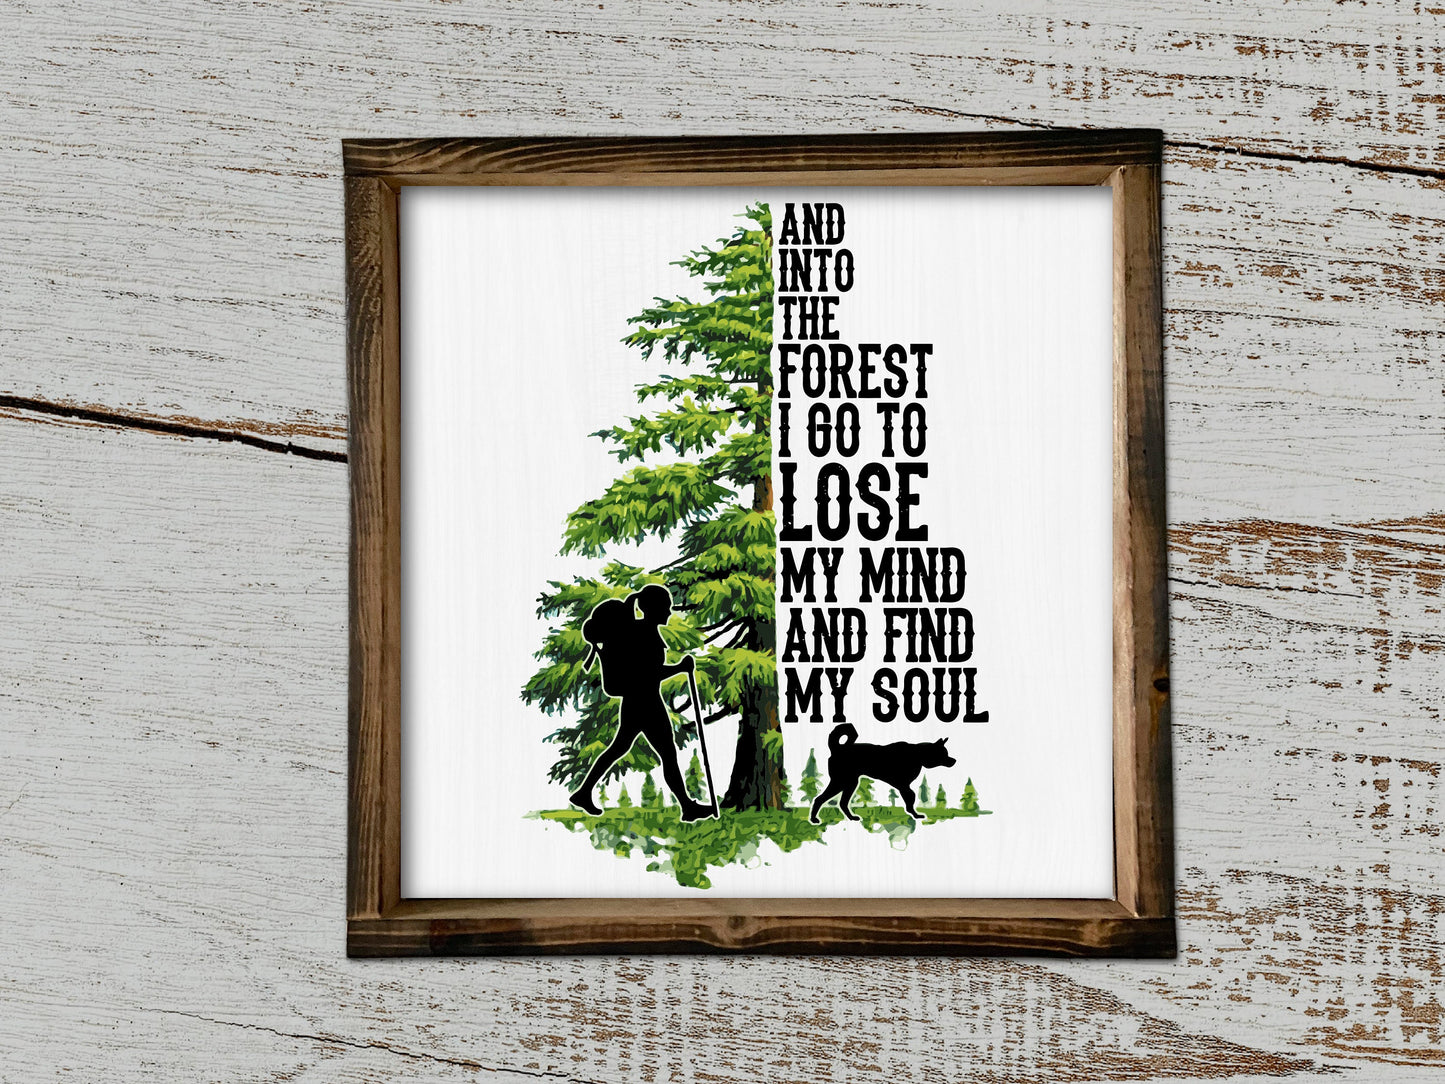 13" Framed And Into the Forest I Go to Lose My Mind and Find My Soul Wood Sign, Forest Farmhouse Sign, Farmhouse Decor